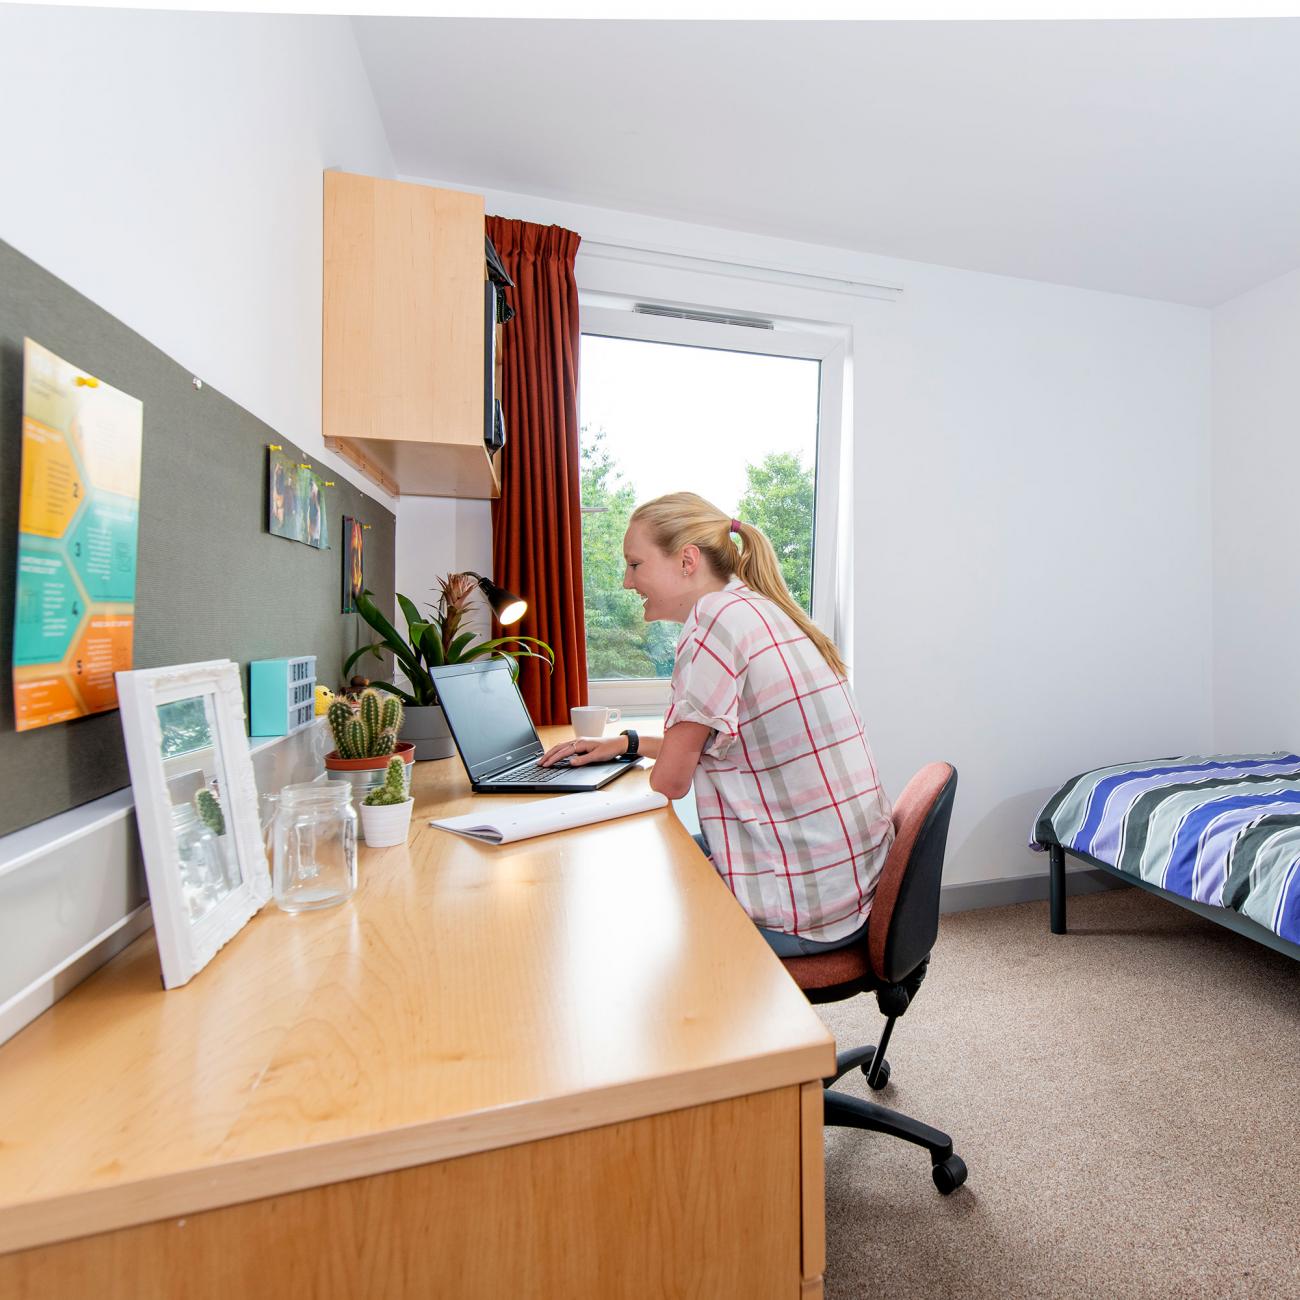 A spacious, bright student bedroom showing a single bed, desk and open window. A student sits at the desk, working on a laptop.